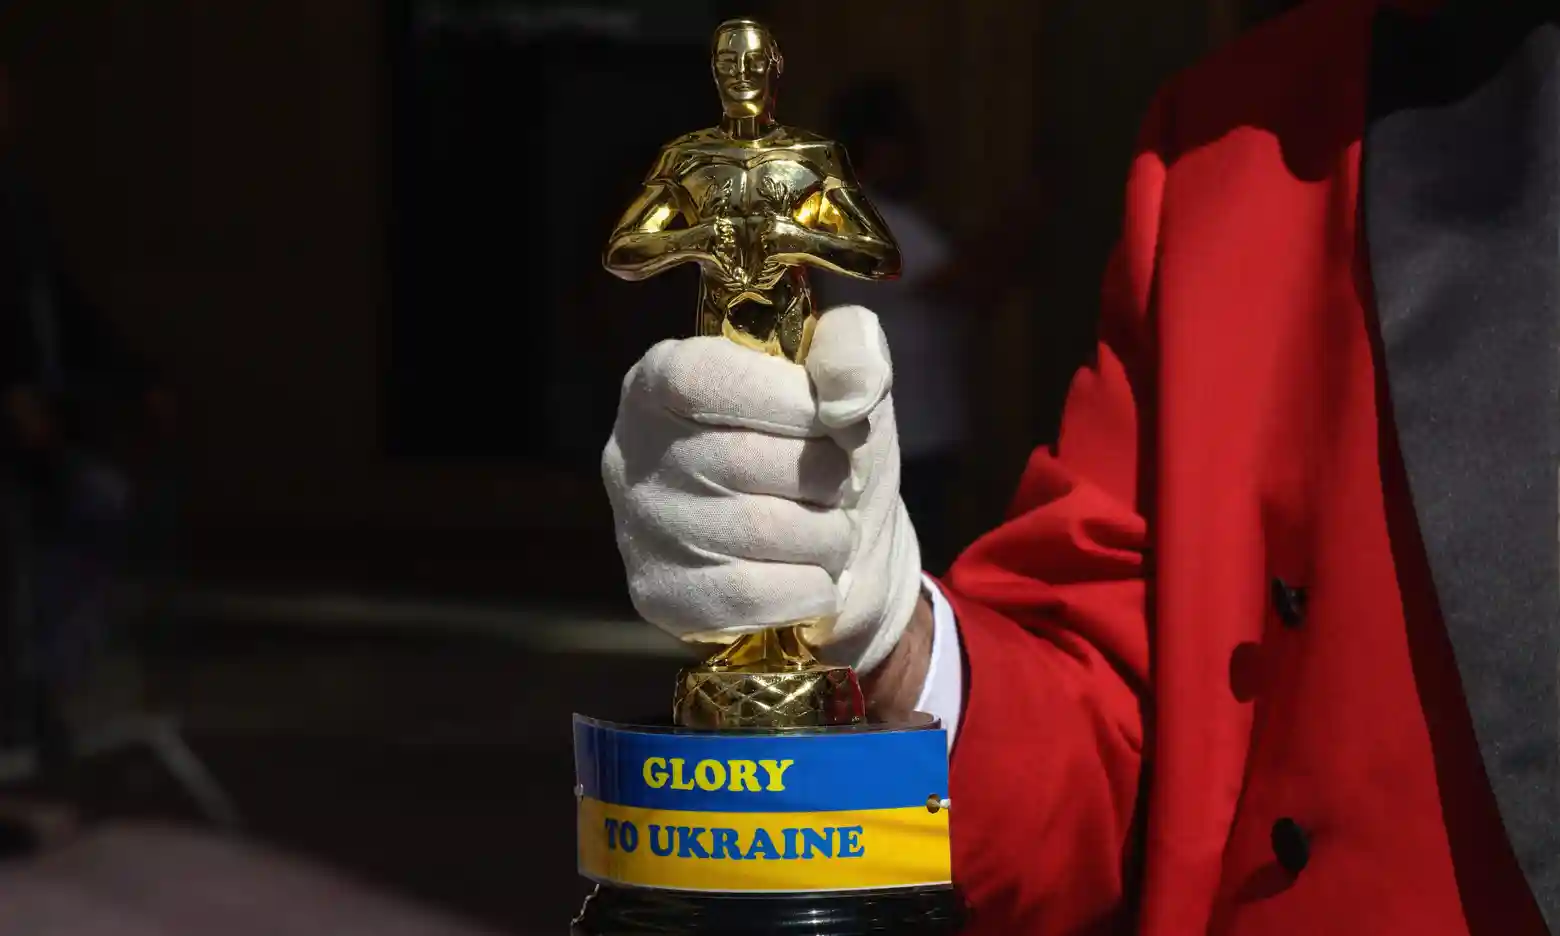 Gregg Donovan holds up an Oscar statue with a sign reading ‘Glory To Ukraine’ ahead of the Oscars Award show at the Dolby Theatre on Hollywood Boulevard in Los Angeles, California, Defense Express